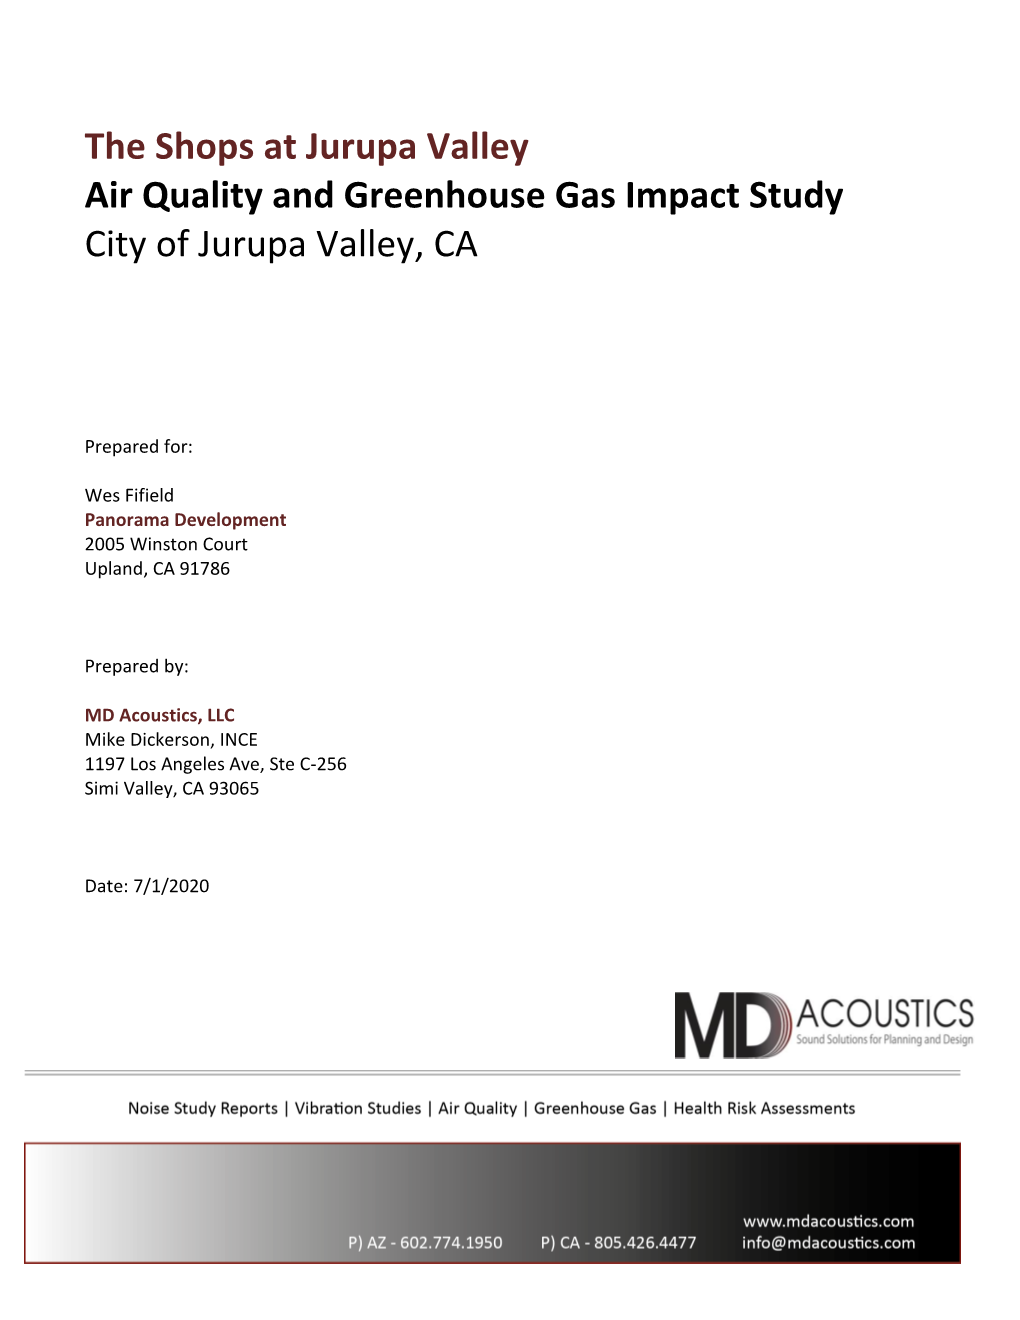 Appendix B-Air Quality and Greenhouse Gas Study